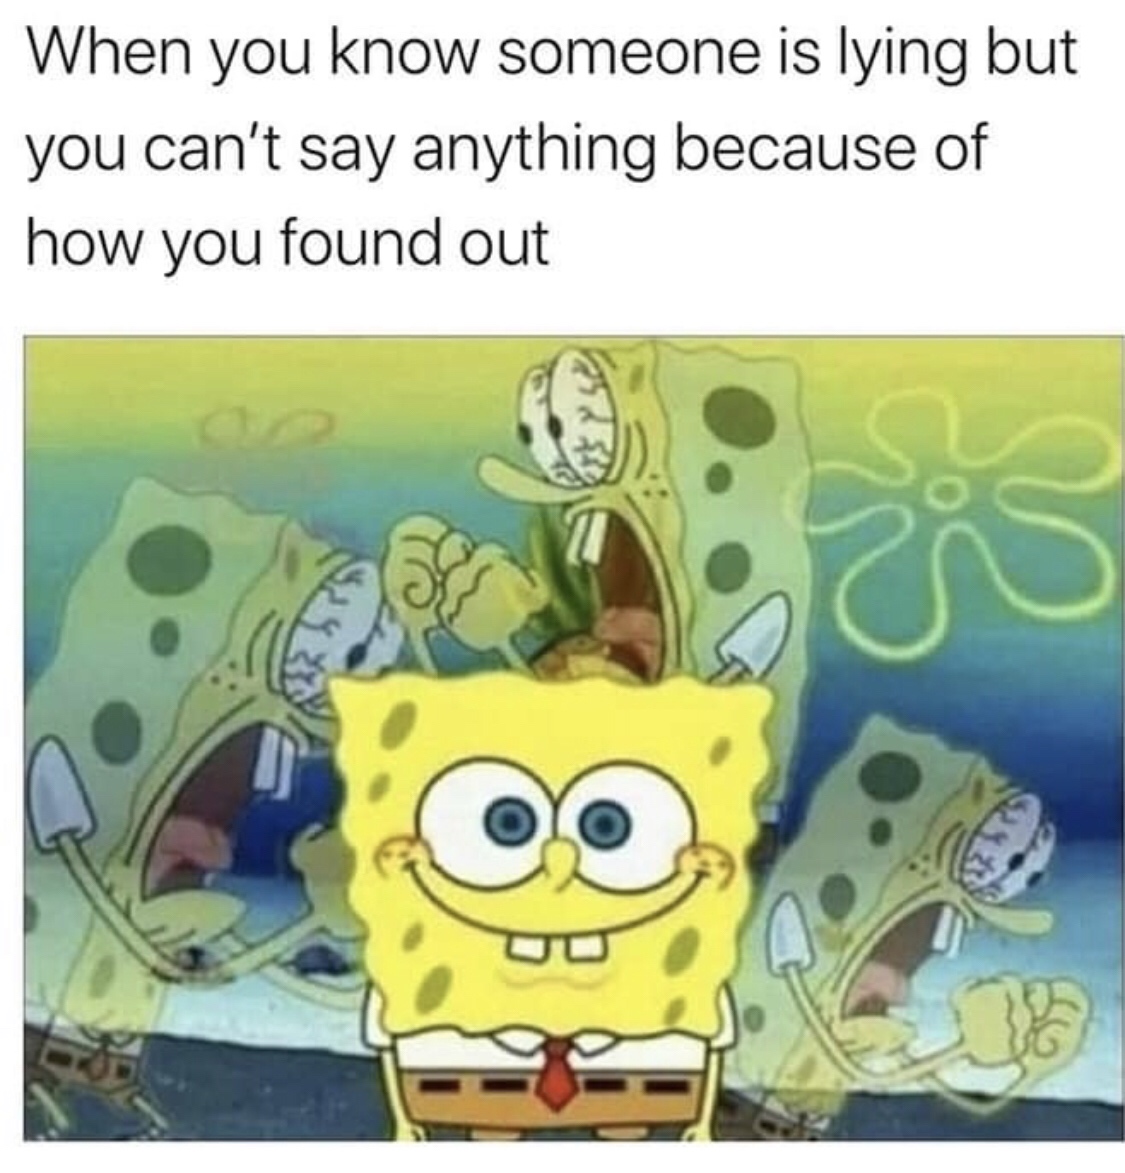 sponge bob - When you know someone is lying but you can't say anything because of how you found out